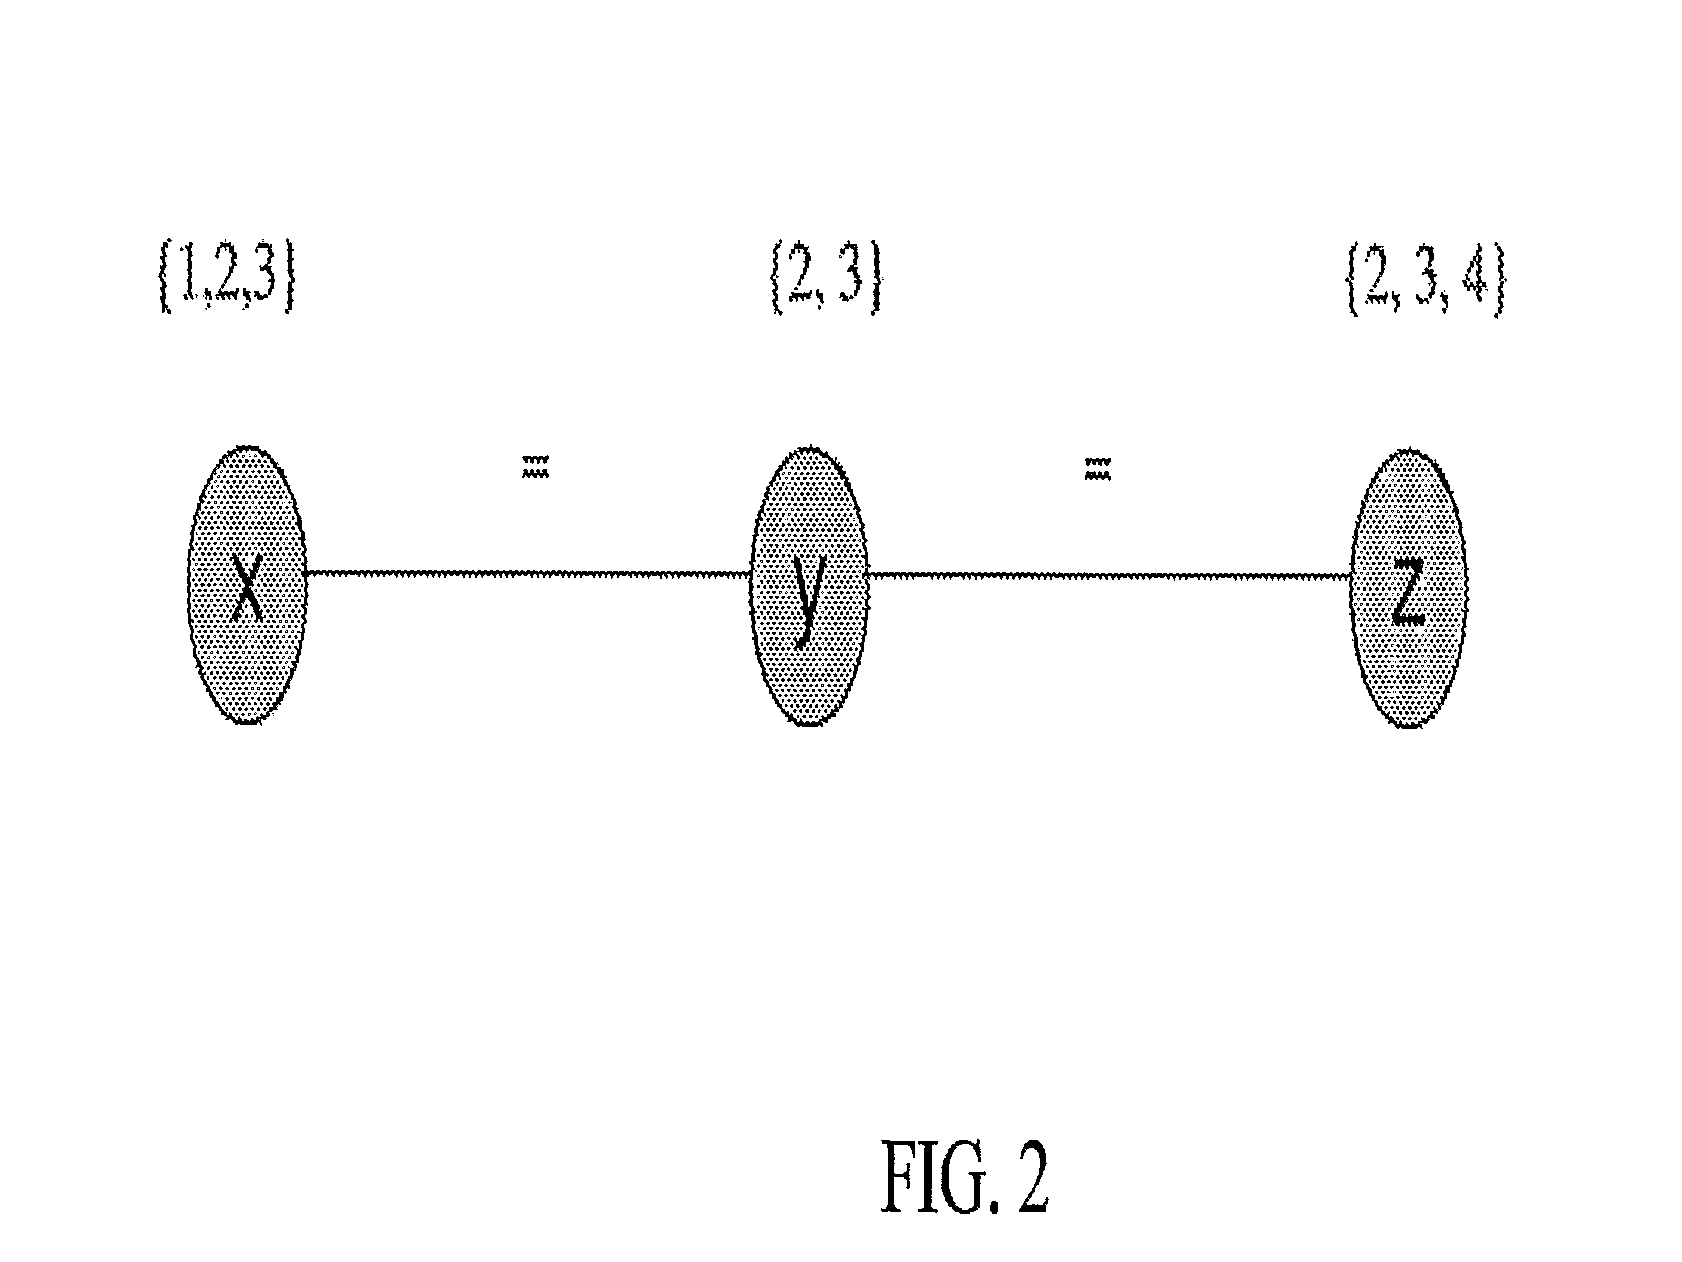 Apparatus and Method for Image Labeling